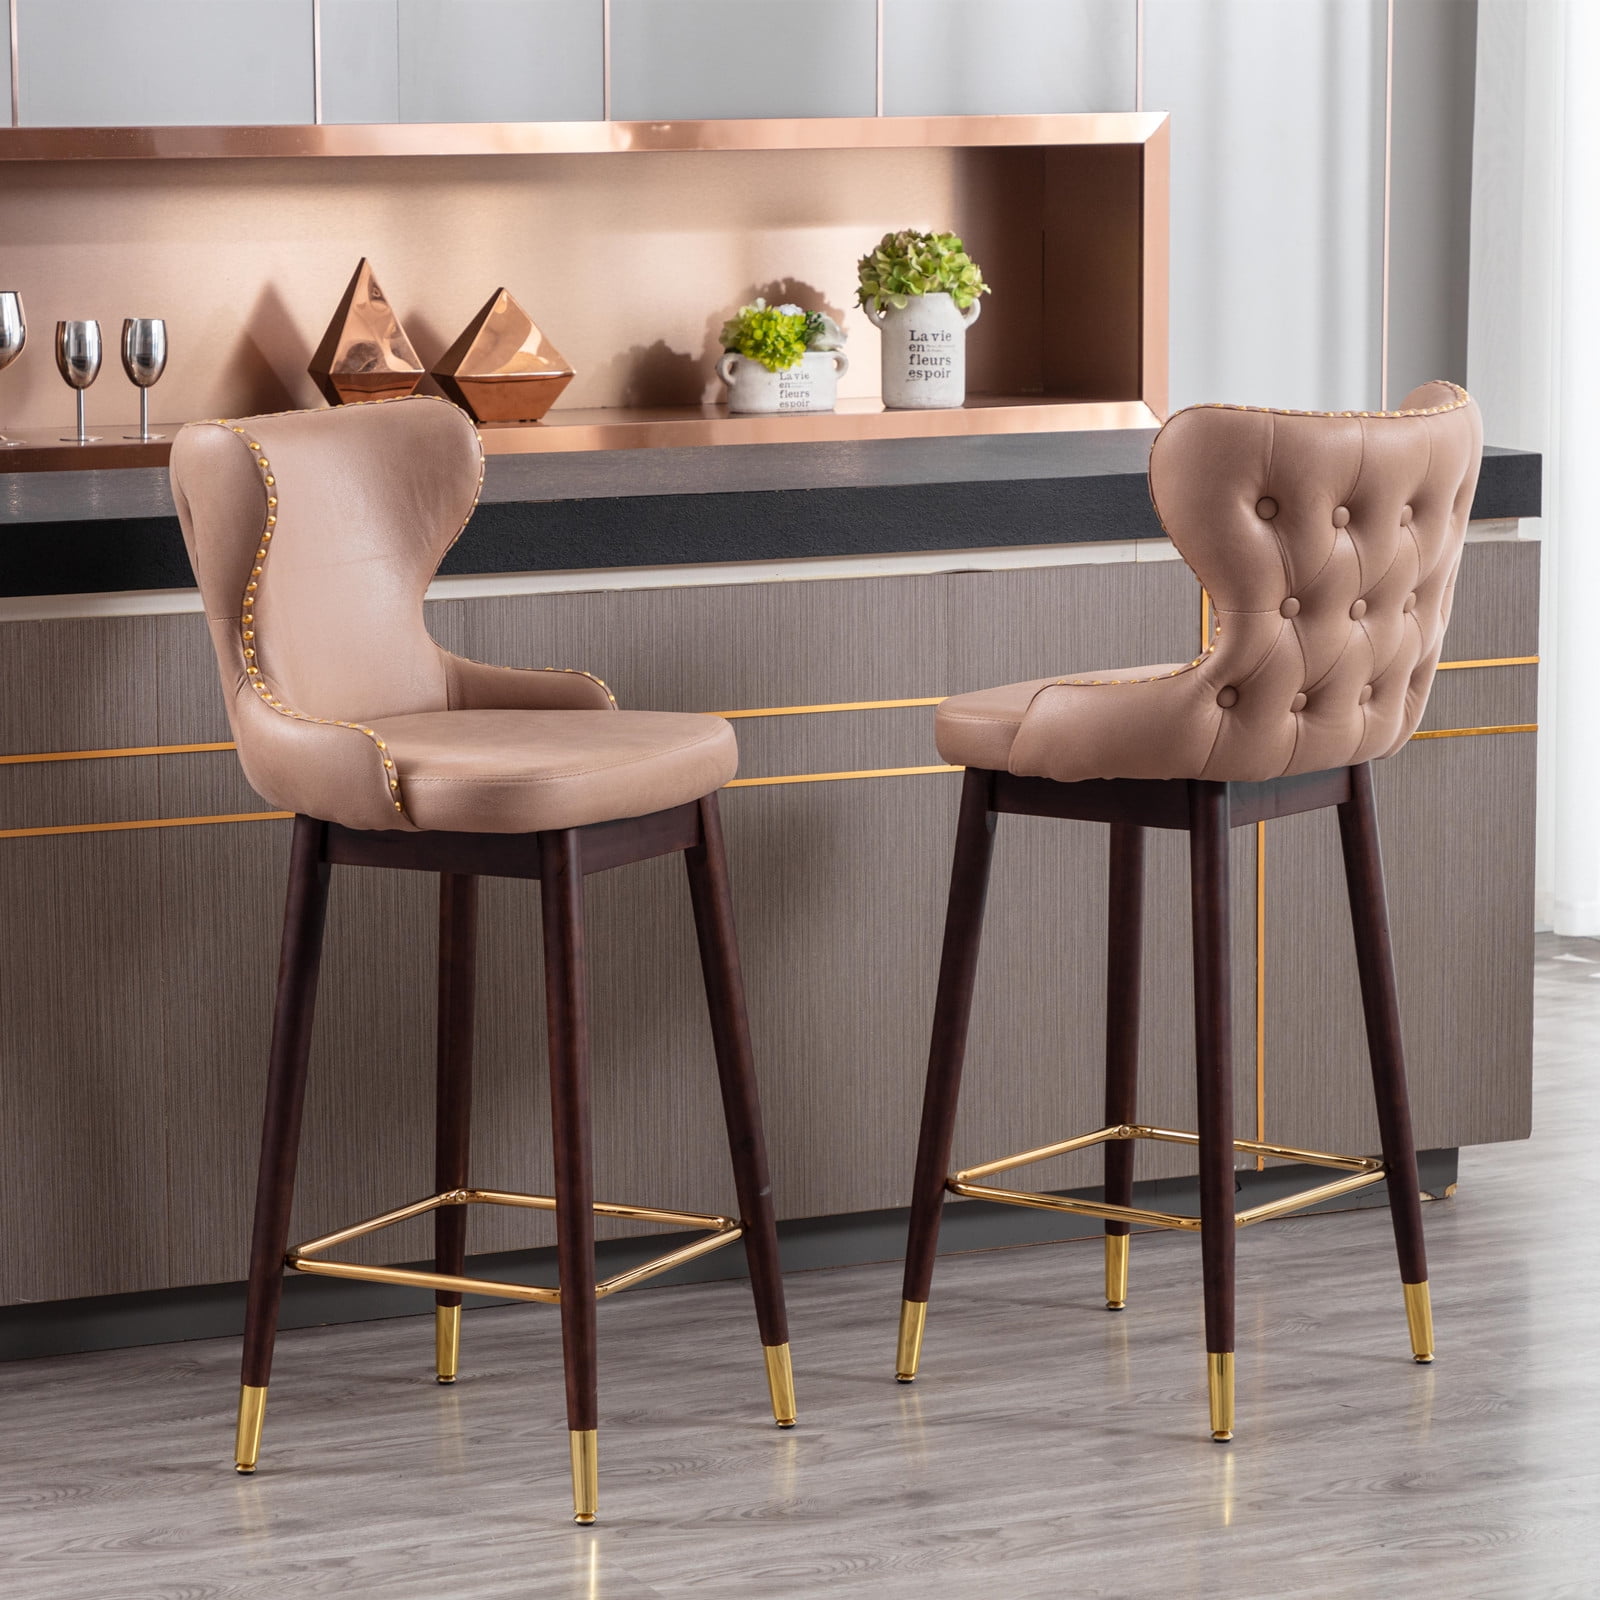 30” Modern Bar Chairs with Wood Legs Home Dining Room Bar Stools Tufted ...